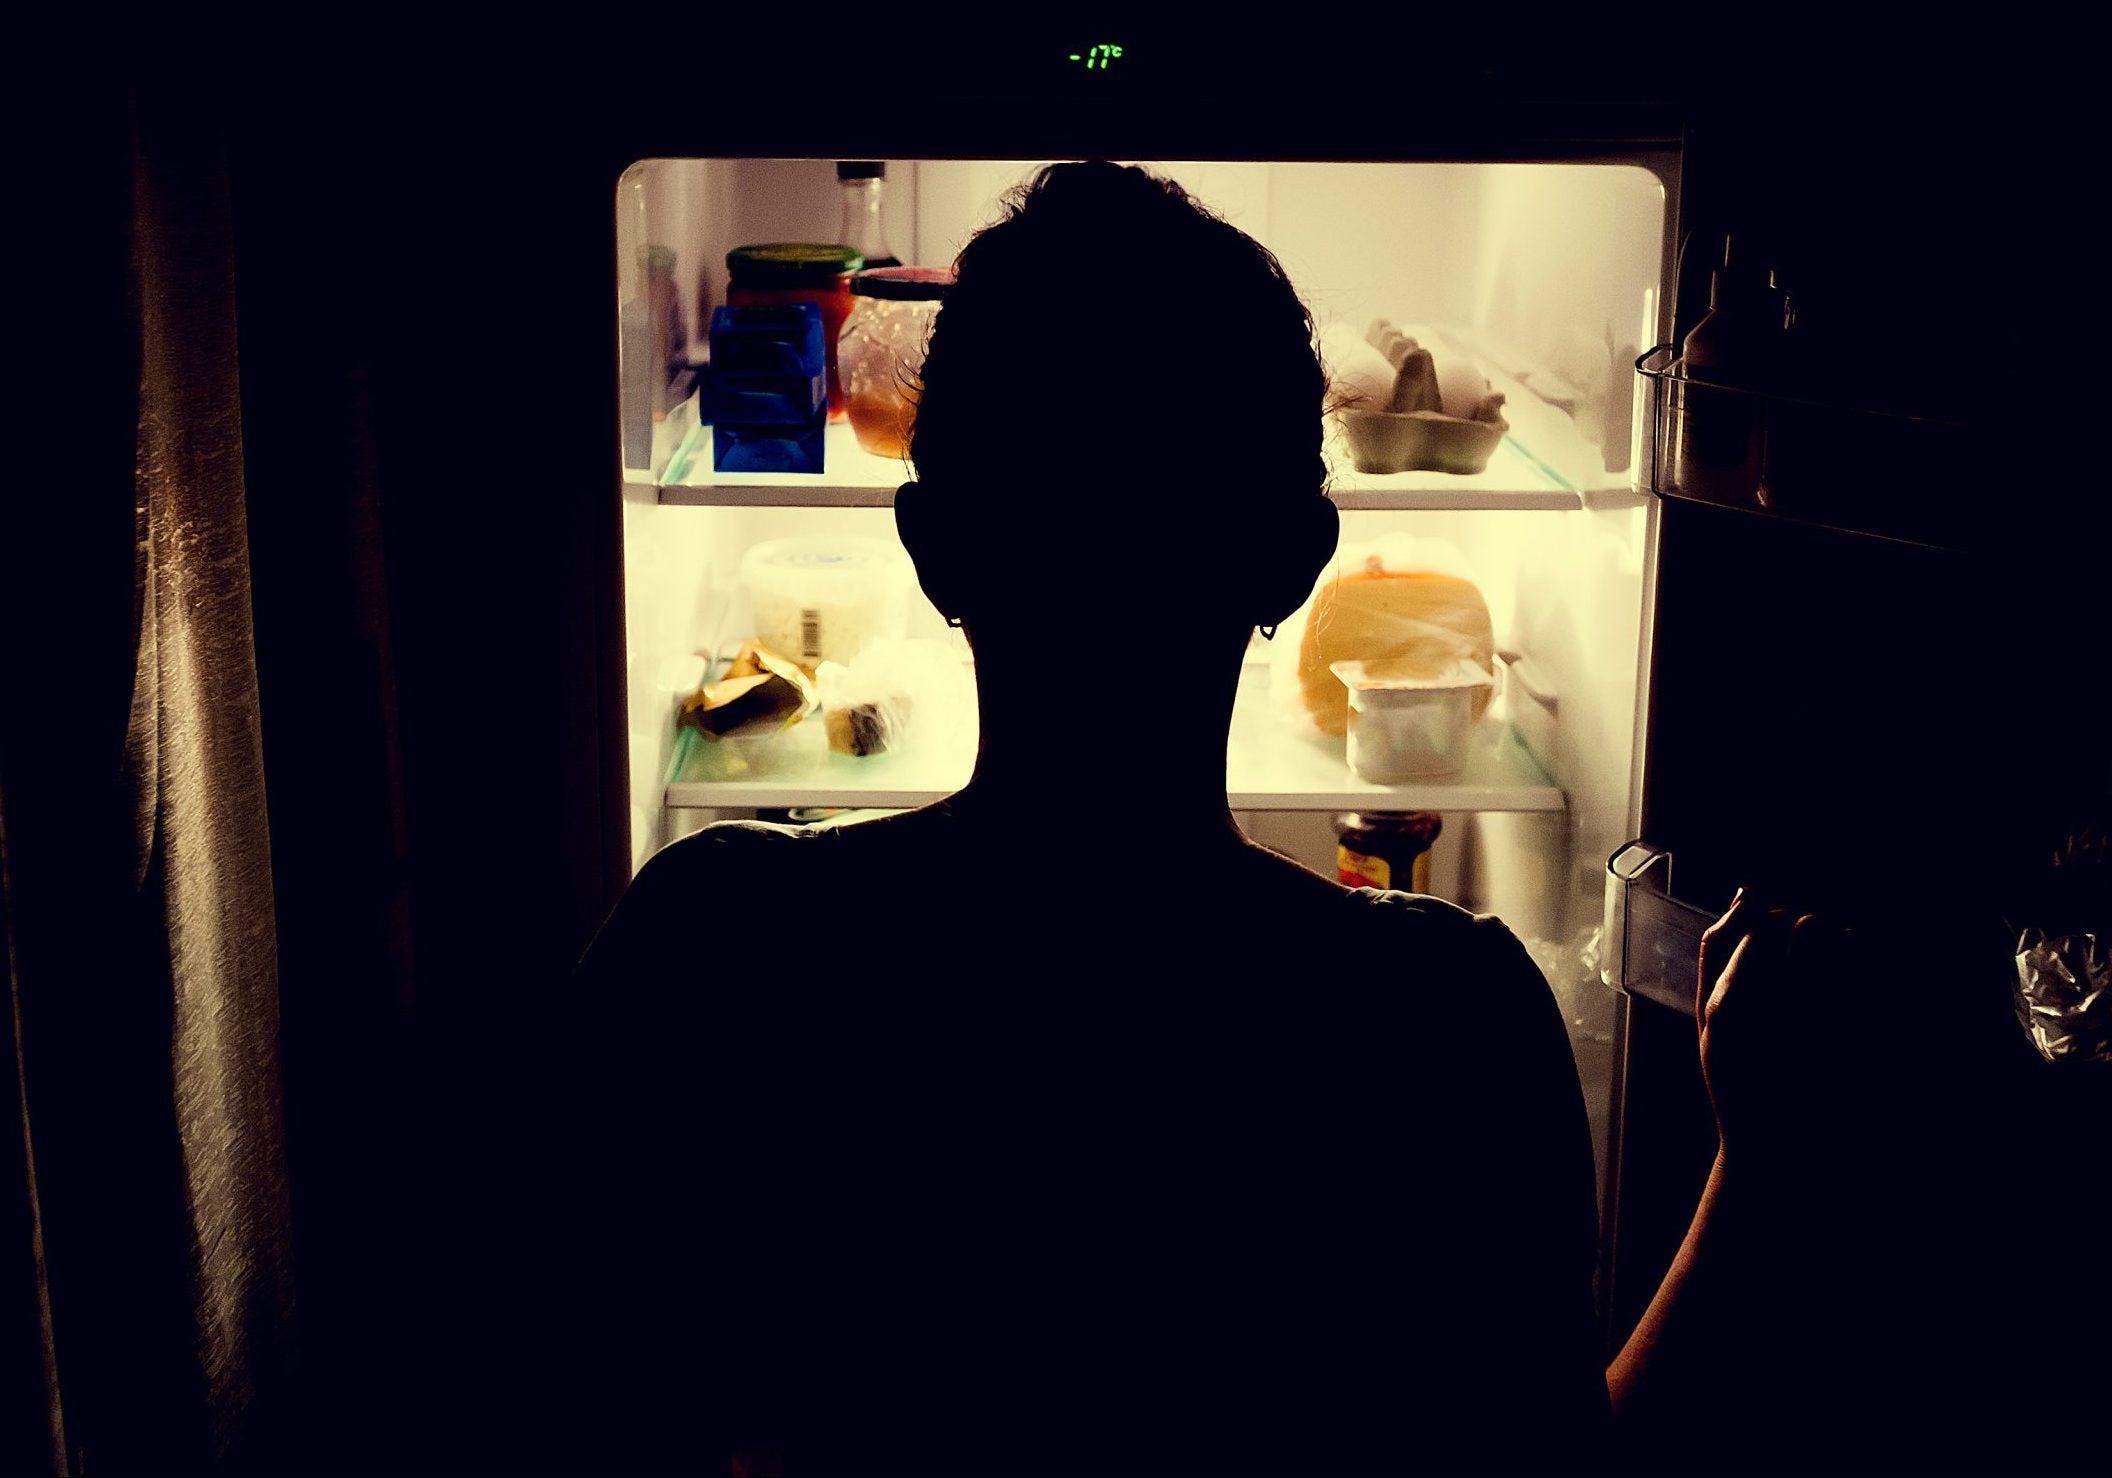 A sillhoutte of a person backlit by the light of a refrigerator, looking for something to eat